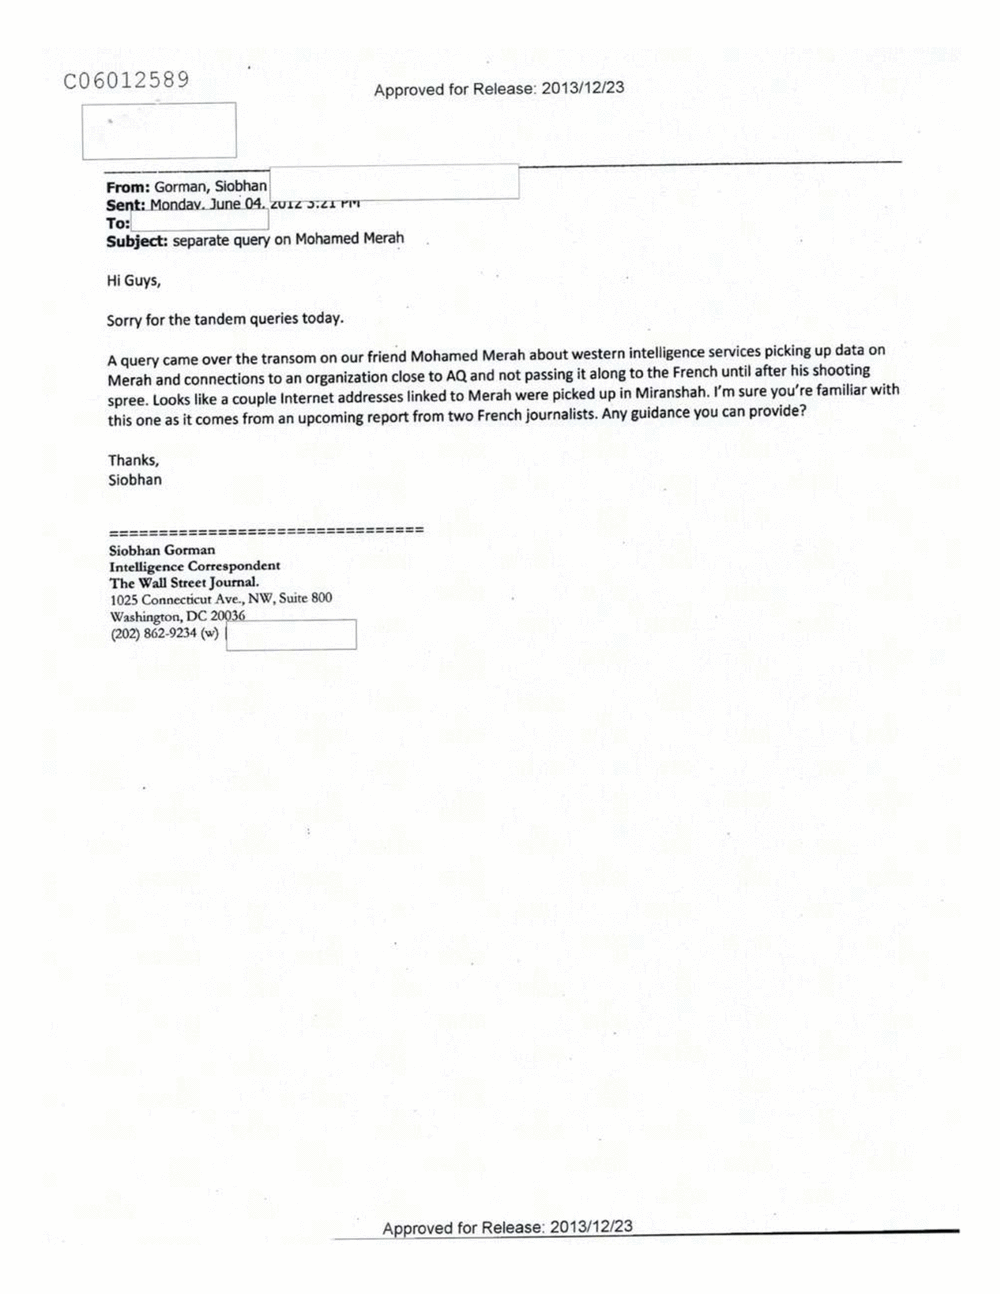 Page 141 from Email Correspondence Between Reporters and CIA Flacks